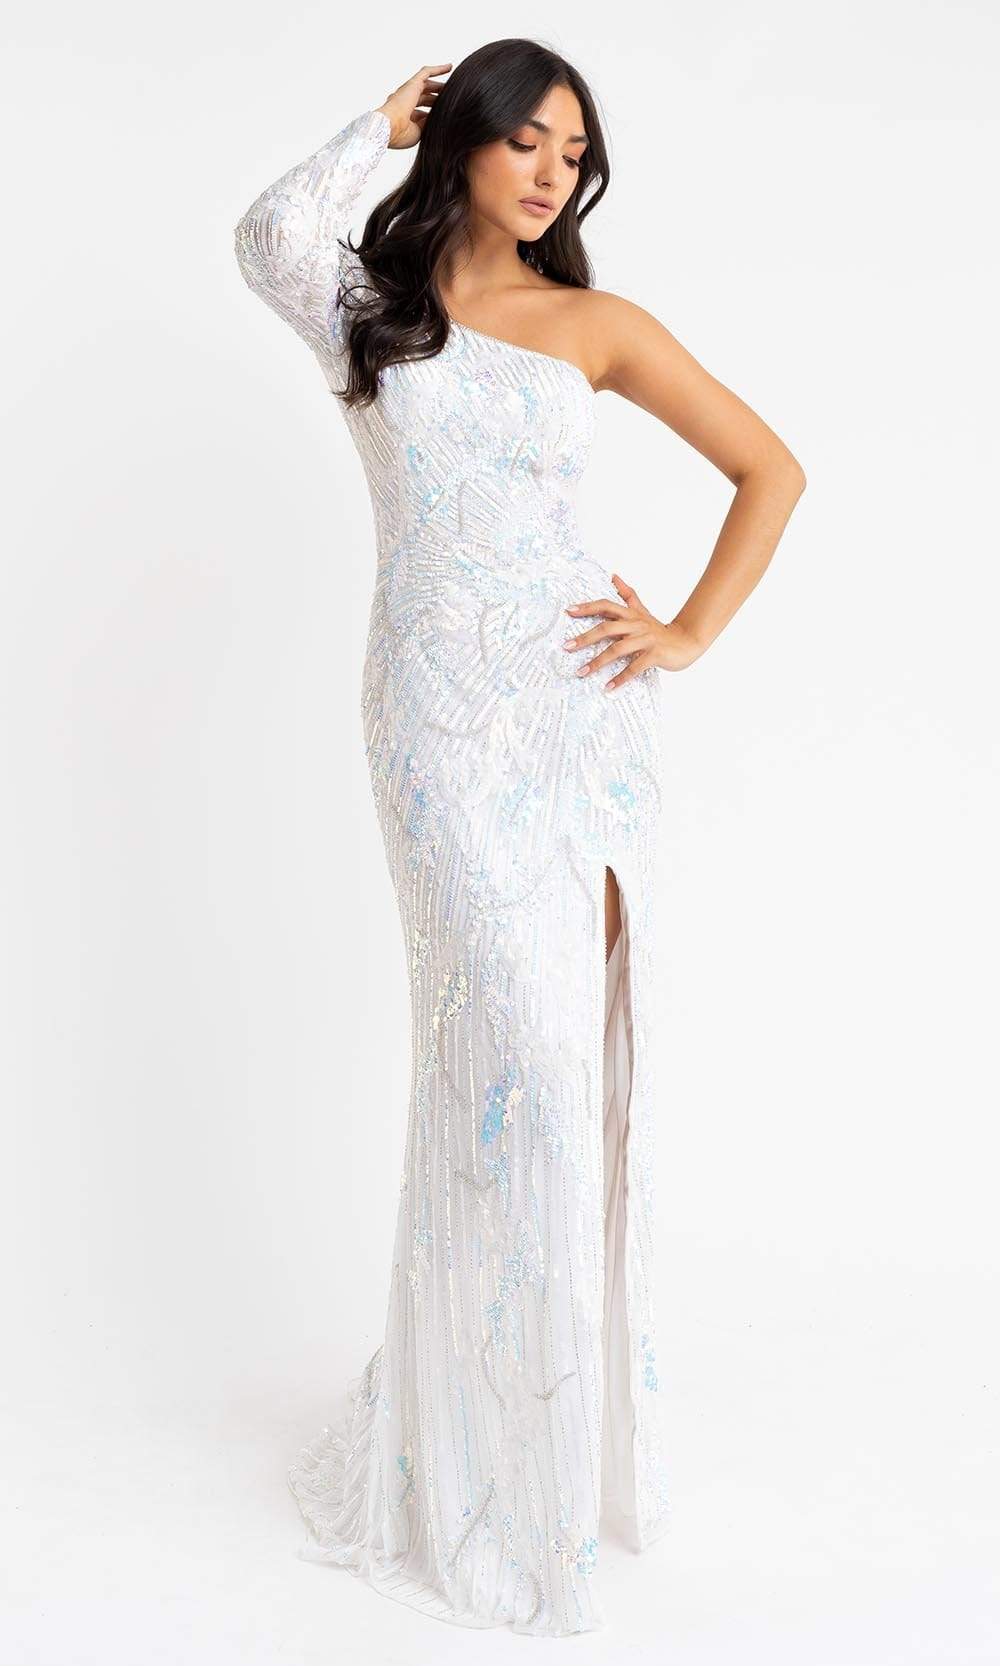 Image of Primavera Couture - 3759 Glamorous Fully Beaded One Shoulder Long Sleeve Evening Gown